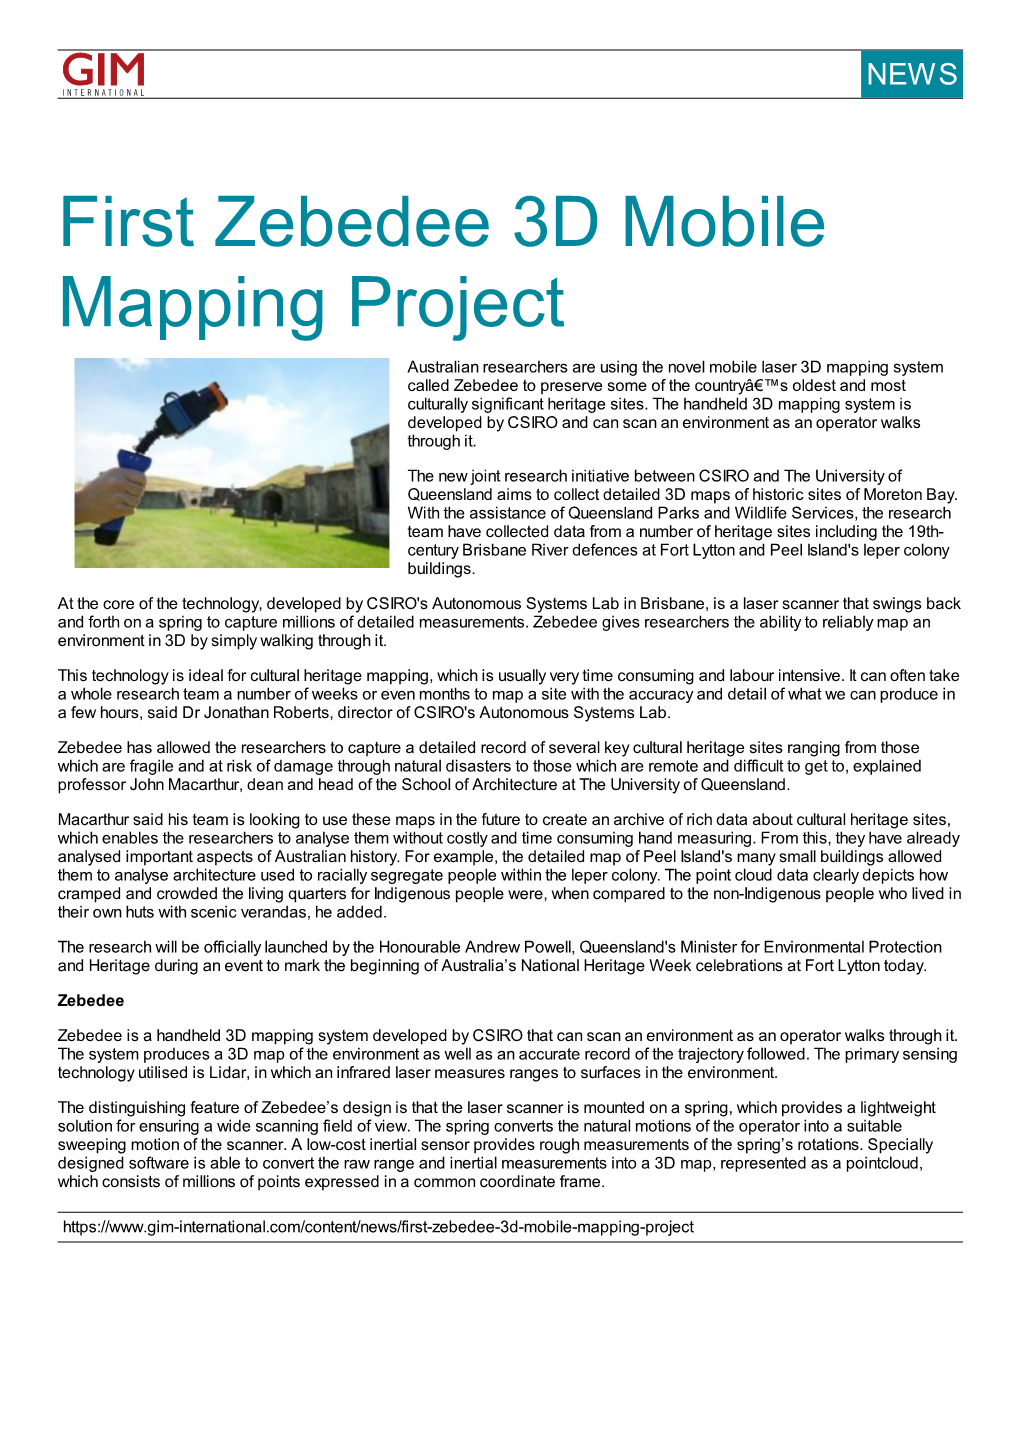 First Zebedee 3D Mobile Mapping Project